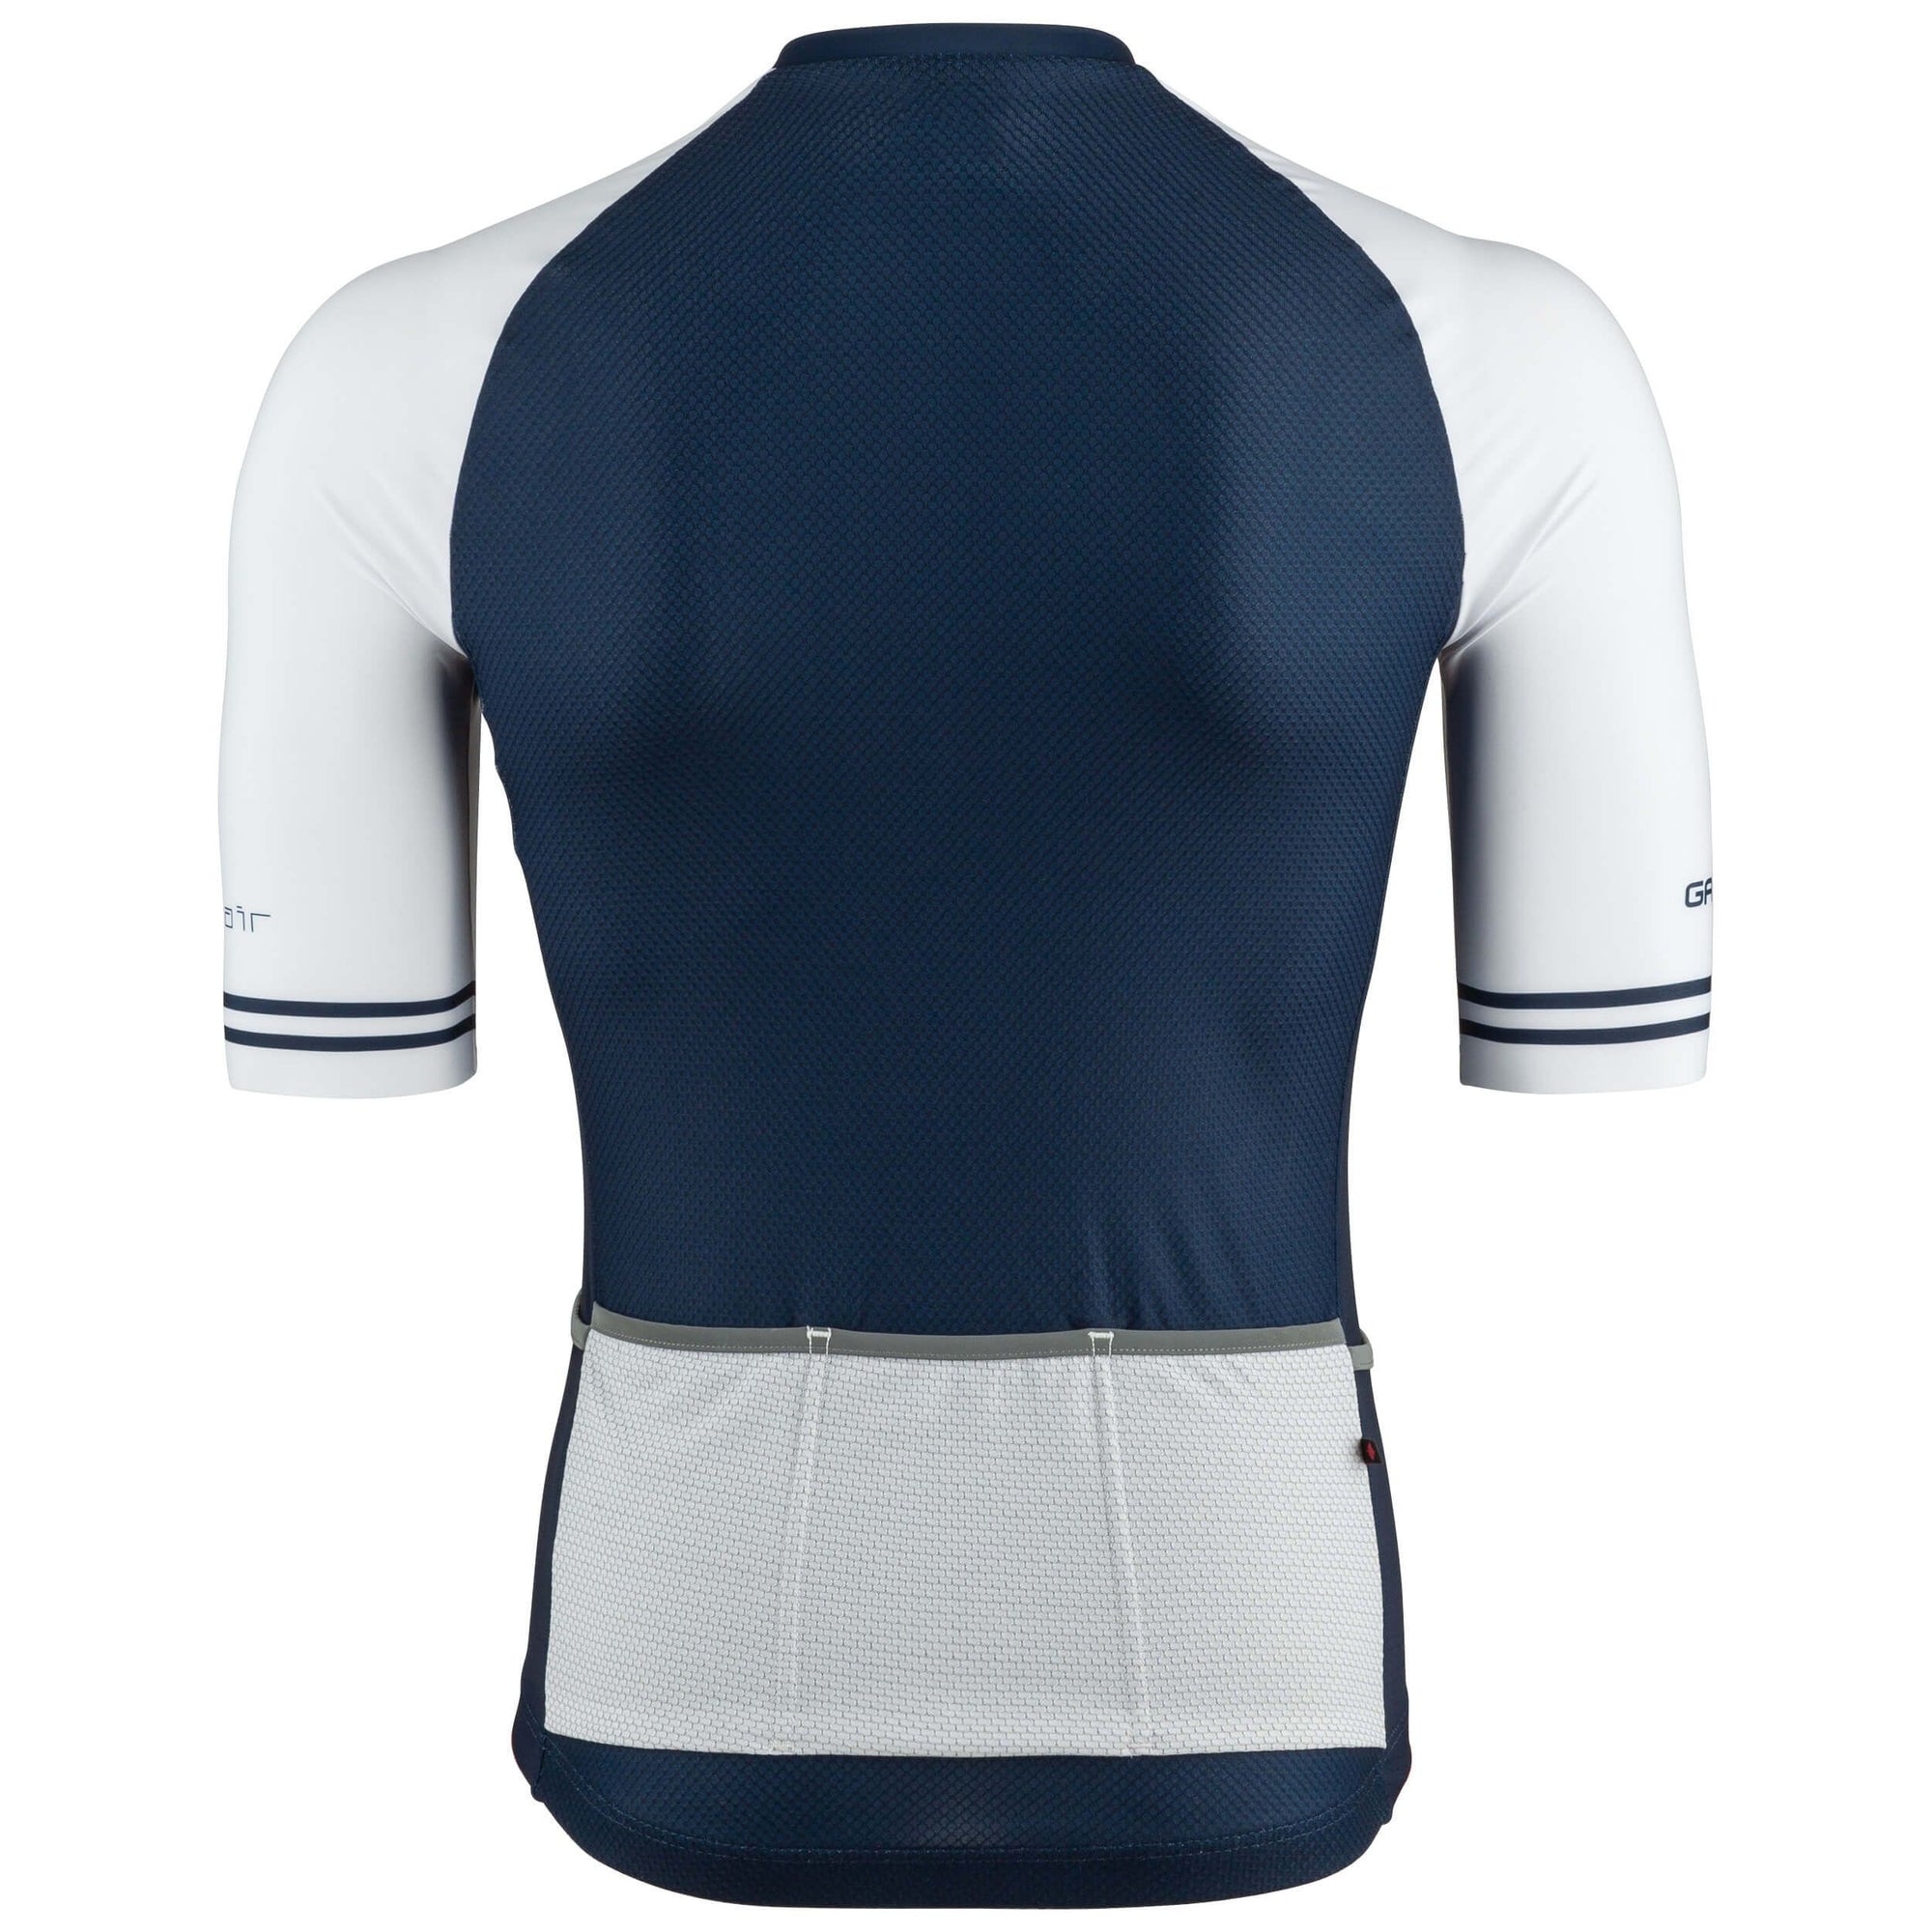 Course Air Jersey - Dnightco, S